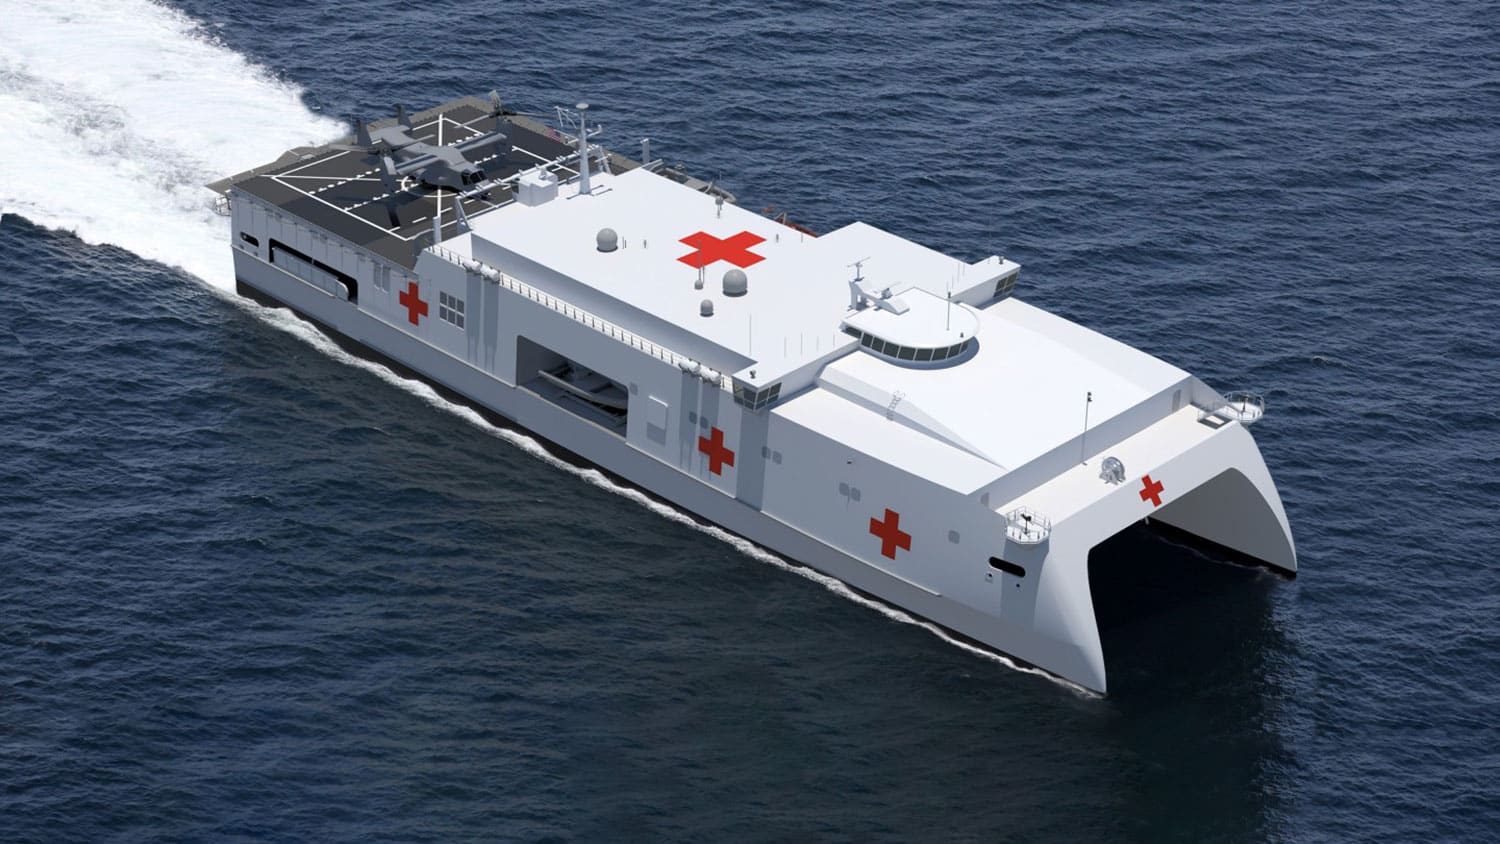 Austal to build three floating hospitals for U.S. Navy.